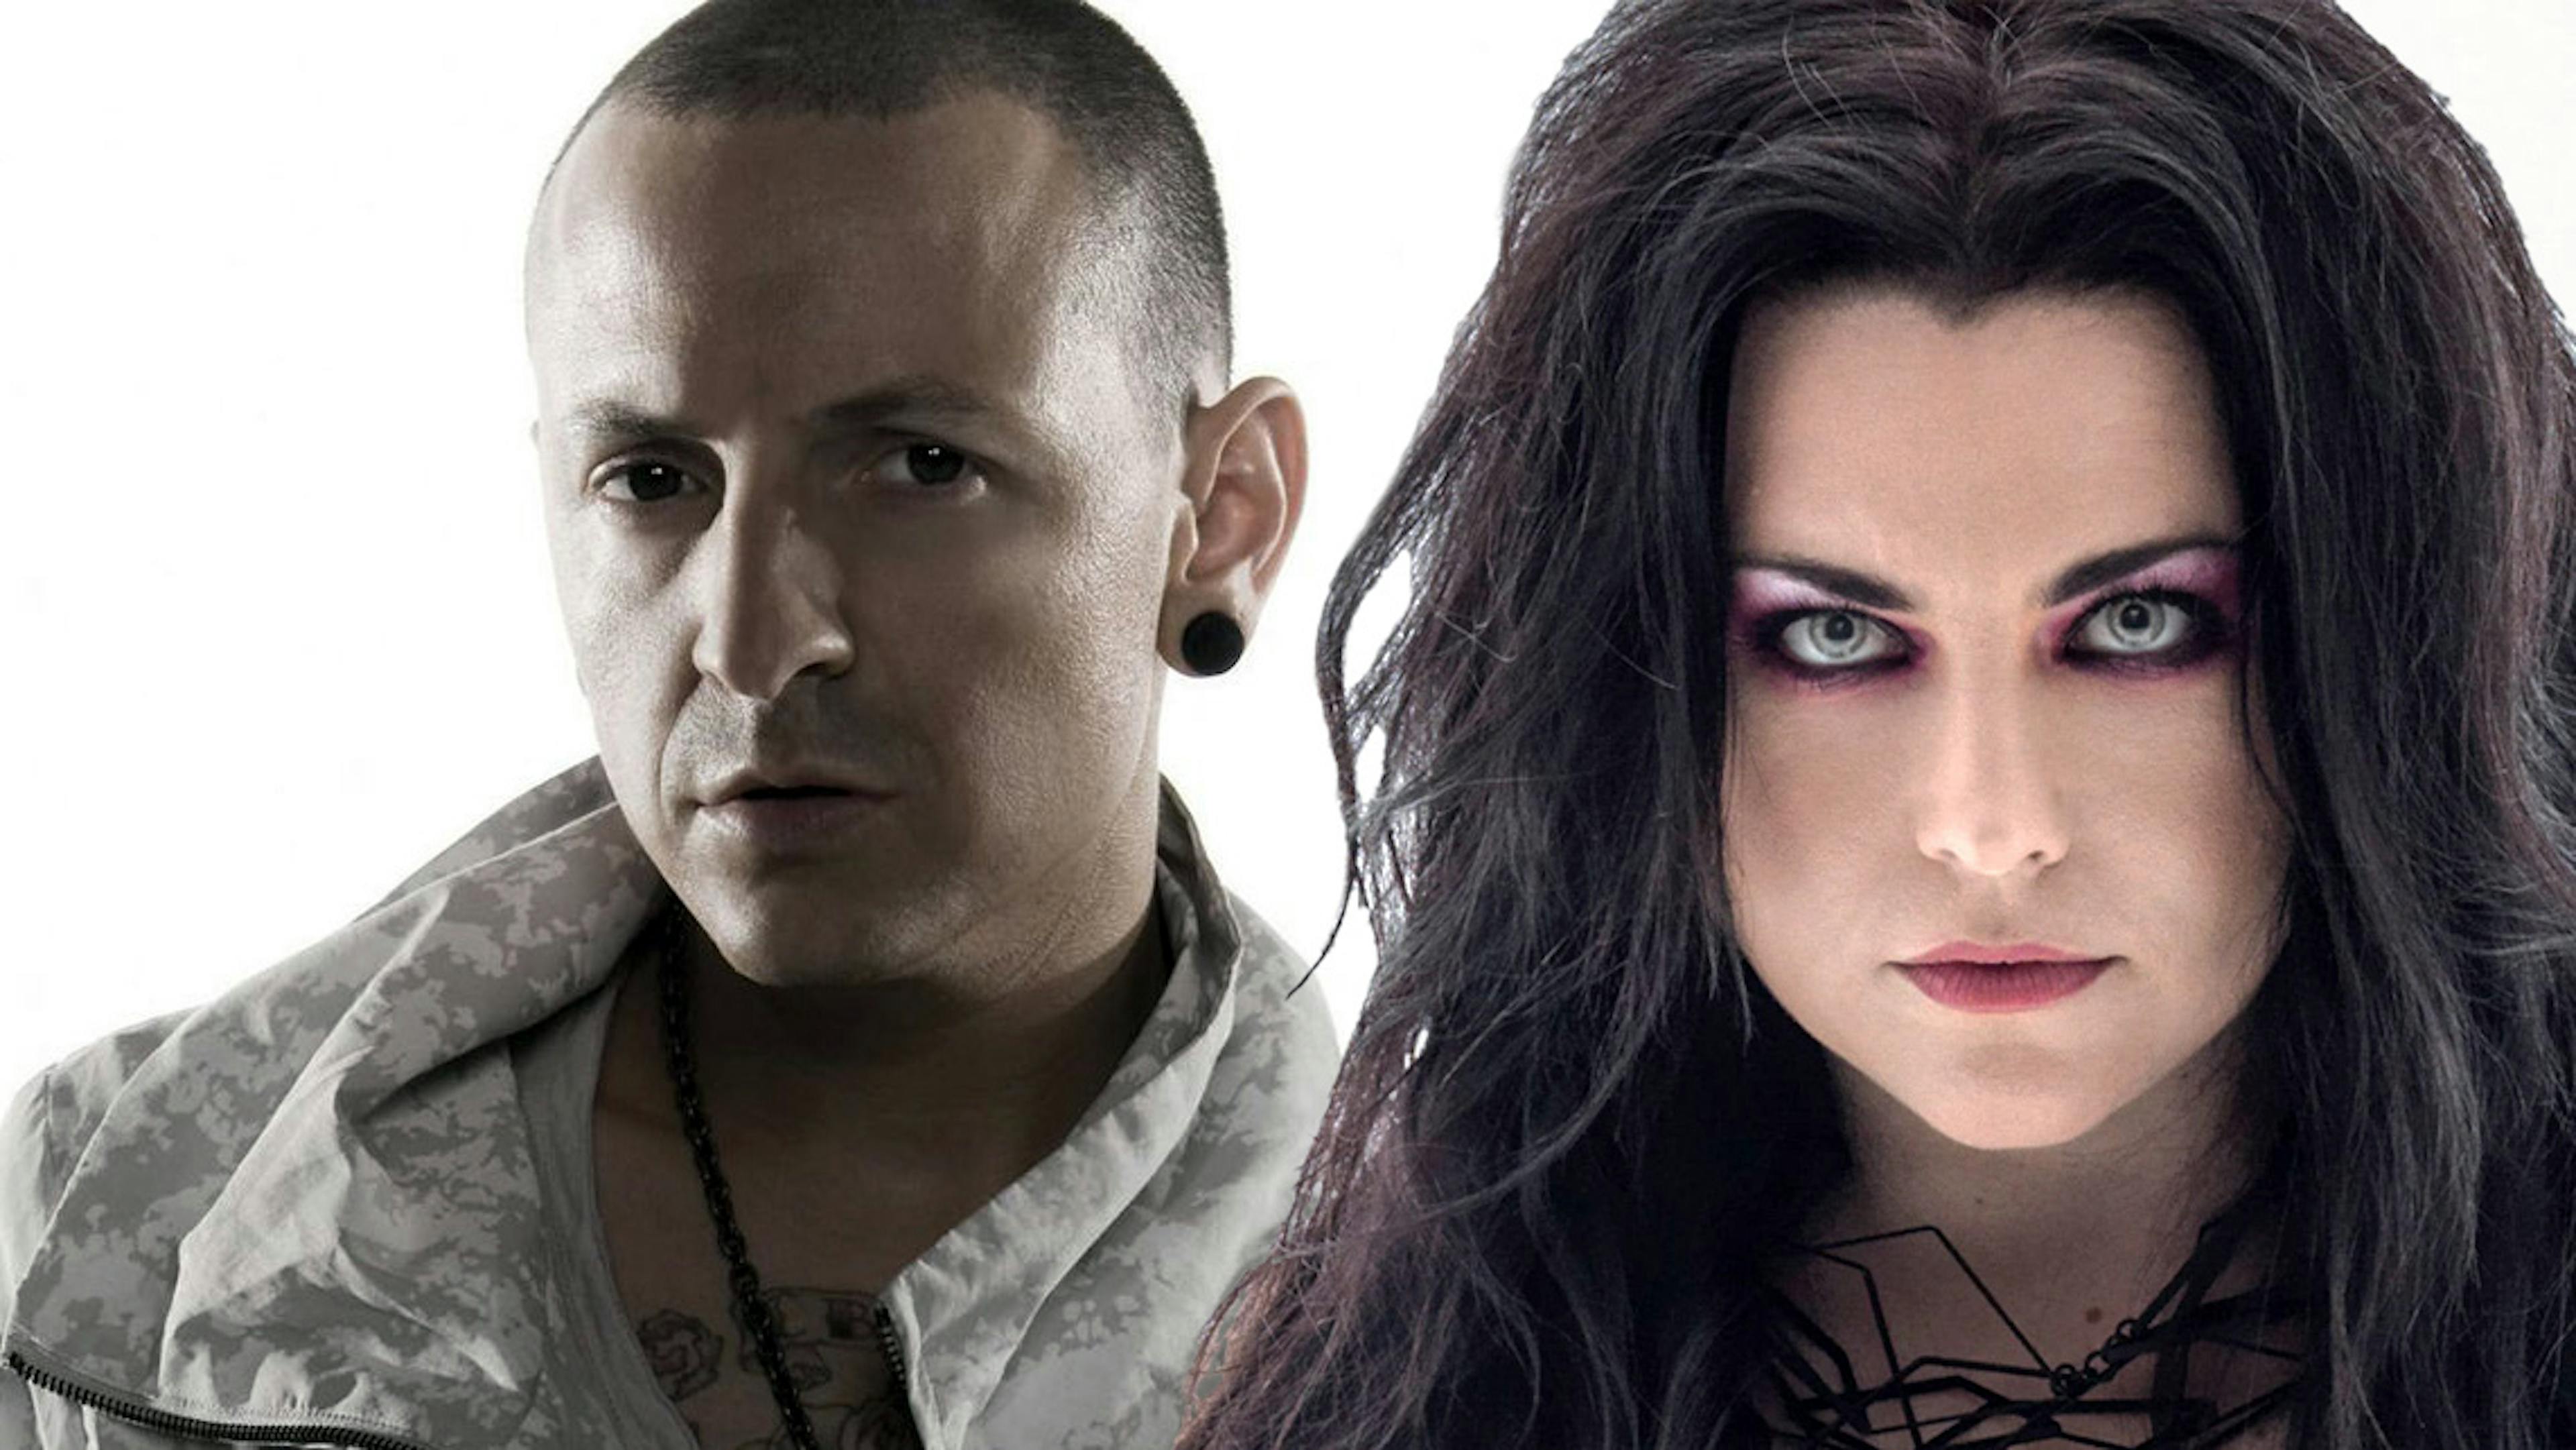 This Linkin Park/Evanescence Mash-Up Will Rip Your Heart Out